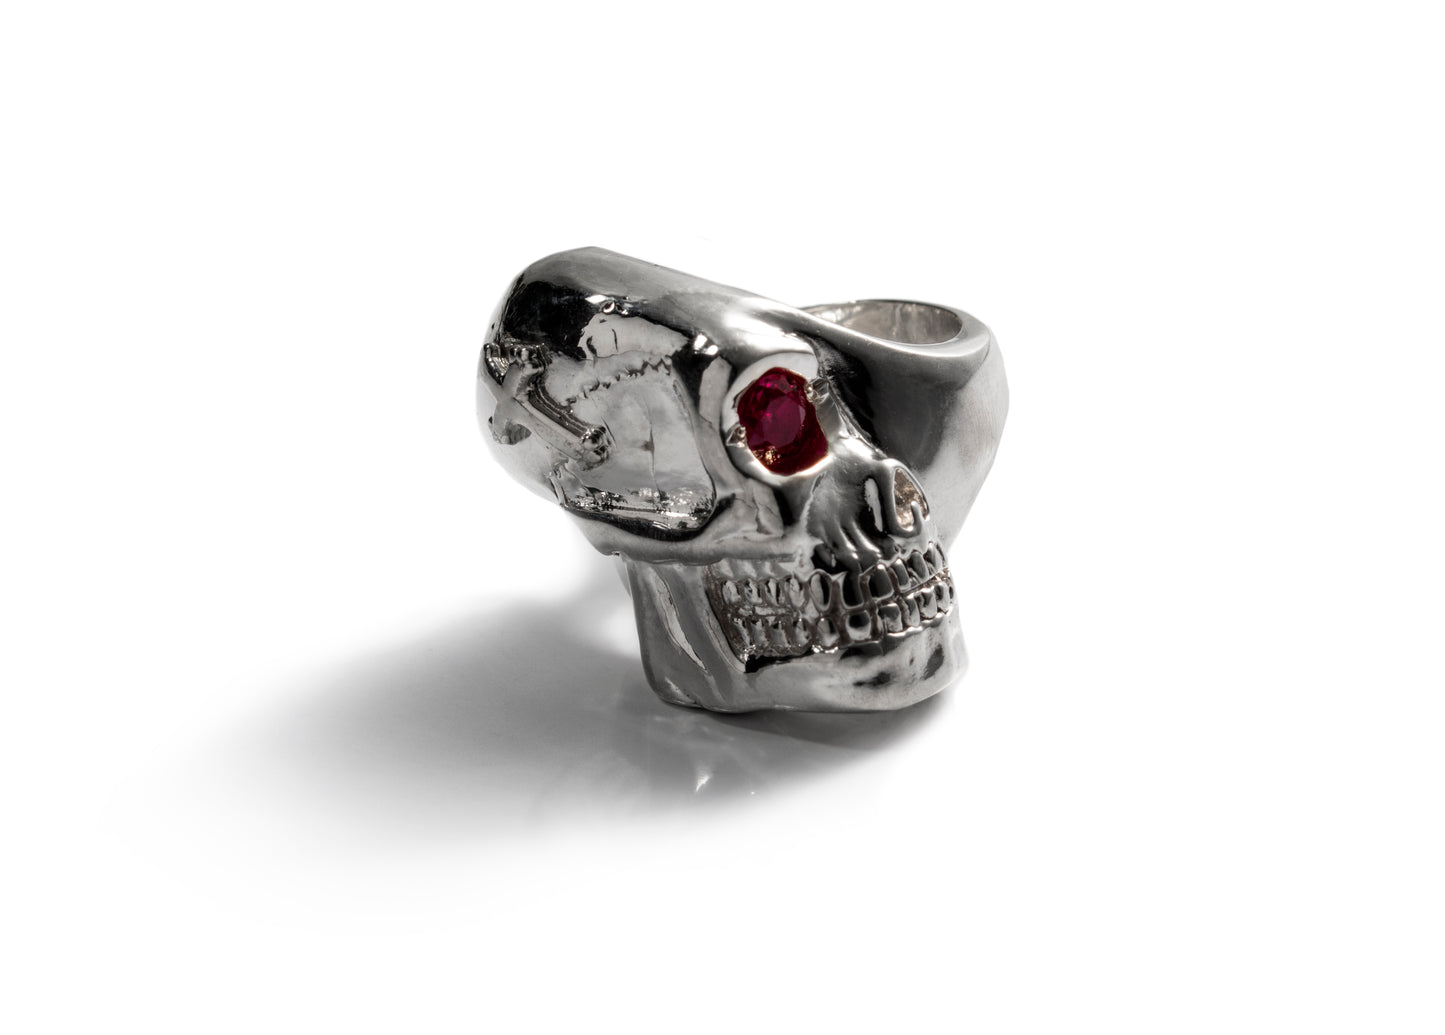 Half Skull Sterling Silver Ring with Ruby Stone & Side Cross Design